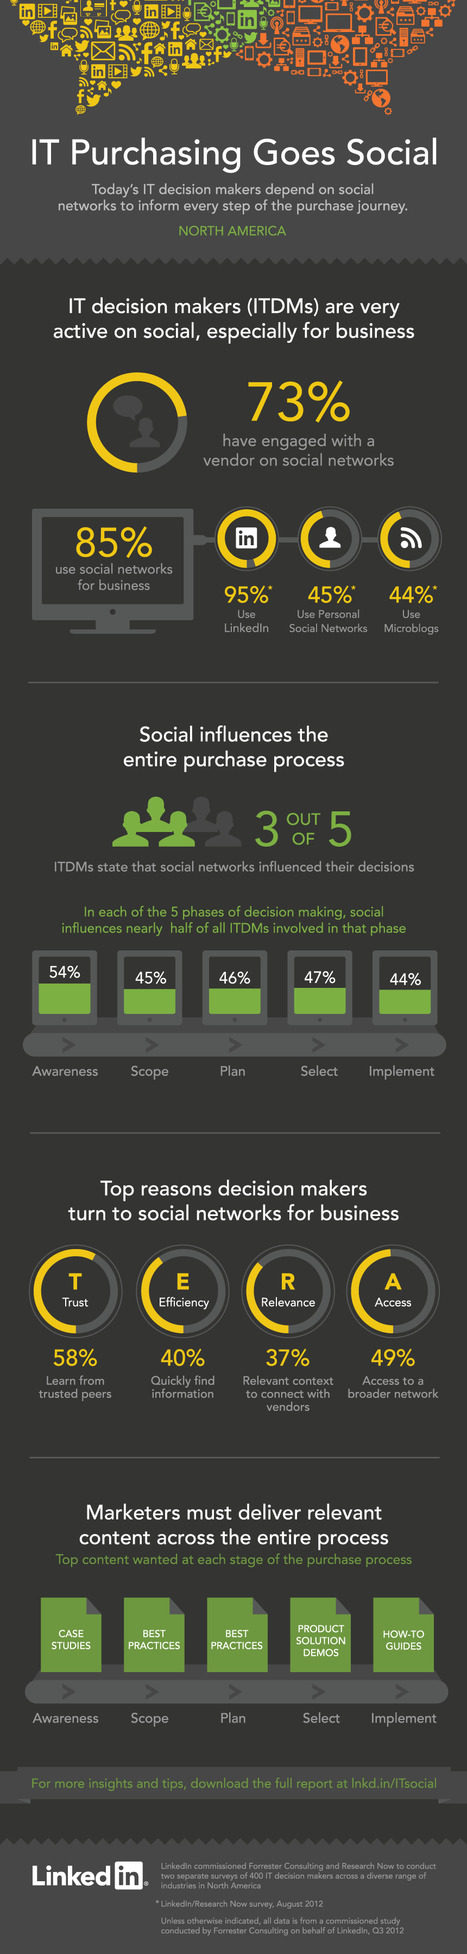 Infographic: How Social Media Impacts Purchasing Decisions... | Digital-News on Scoop.it today | Scoop.it